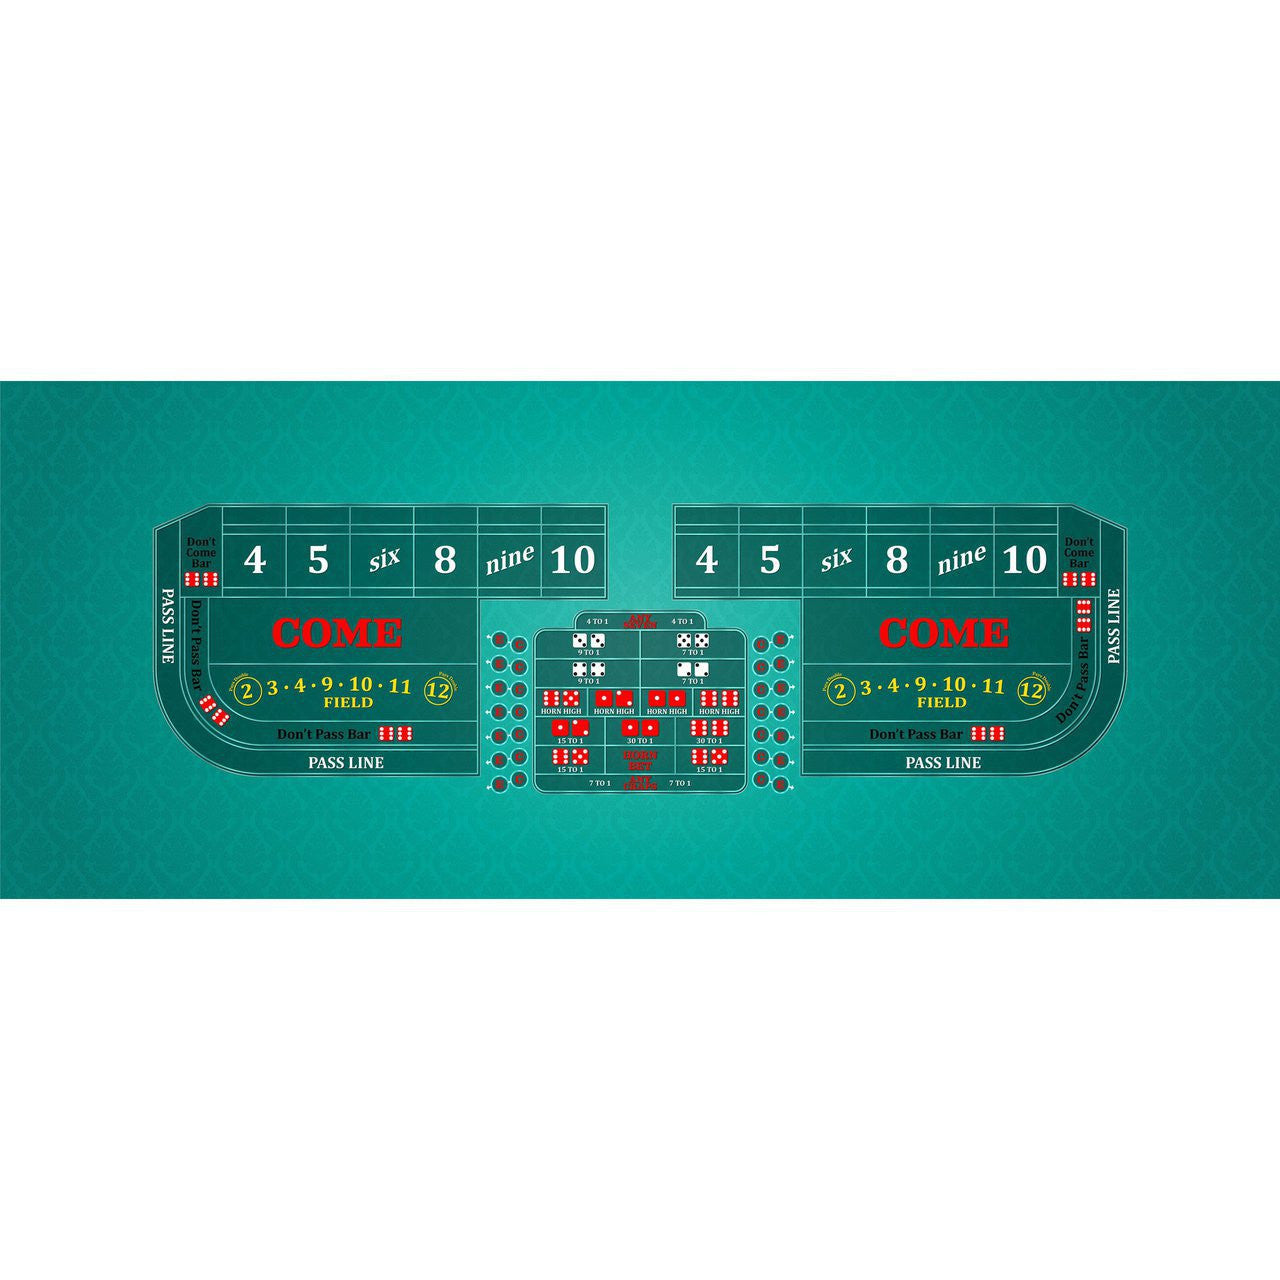 Classic Craps Layout - TEAL - Casino Supply - 1